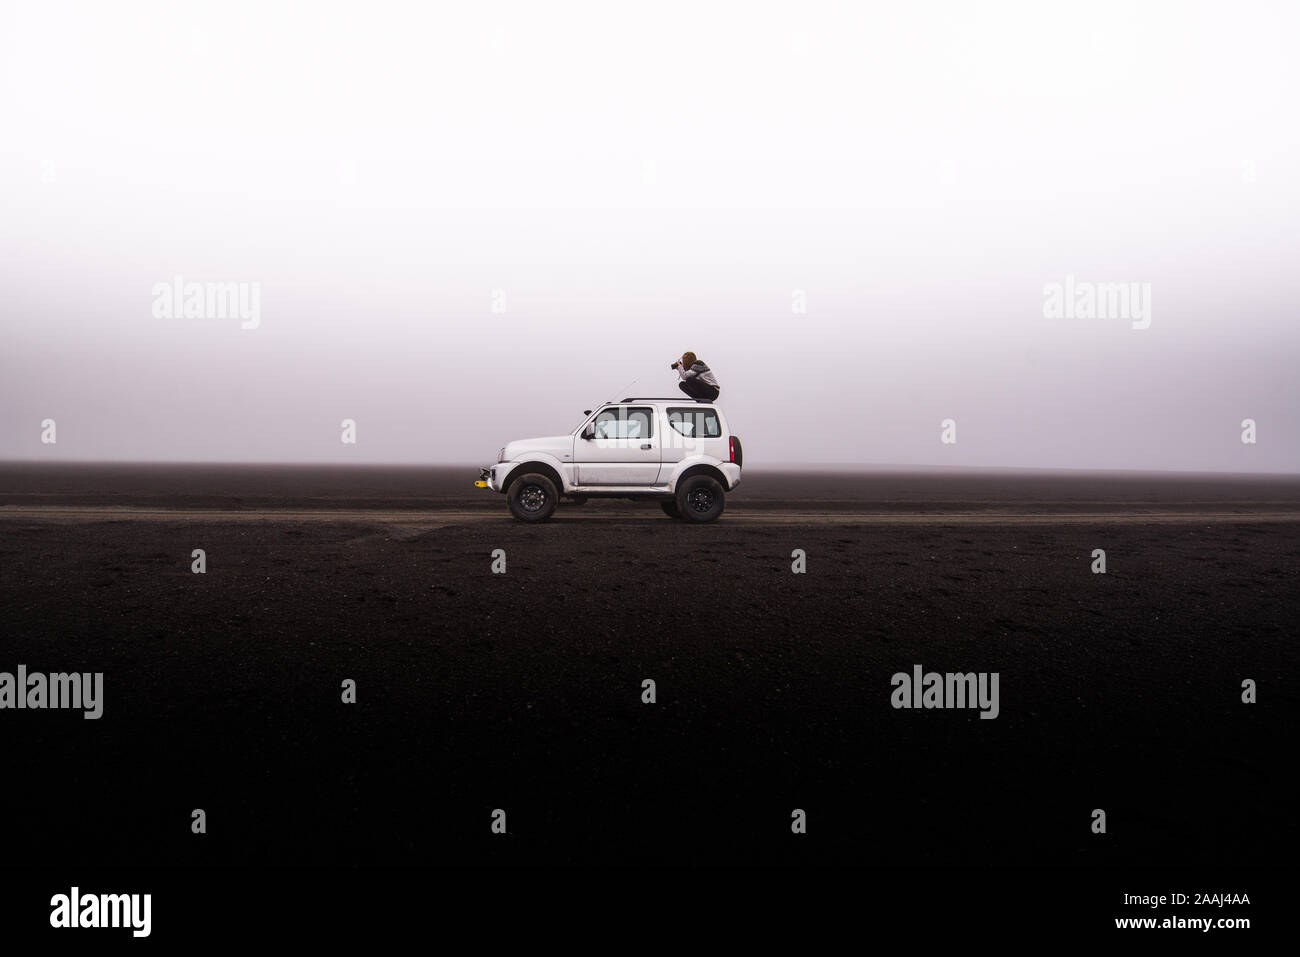 Woman photographing from top of off road vehicle, Landmannalaugar, Iceland Stock Photo